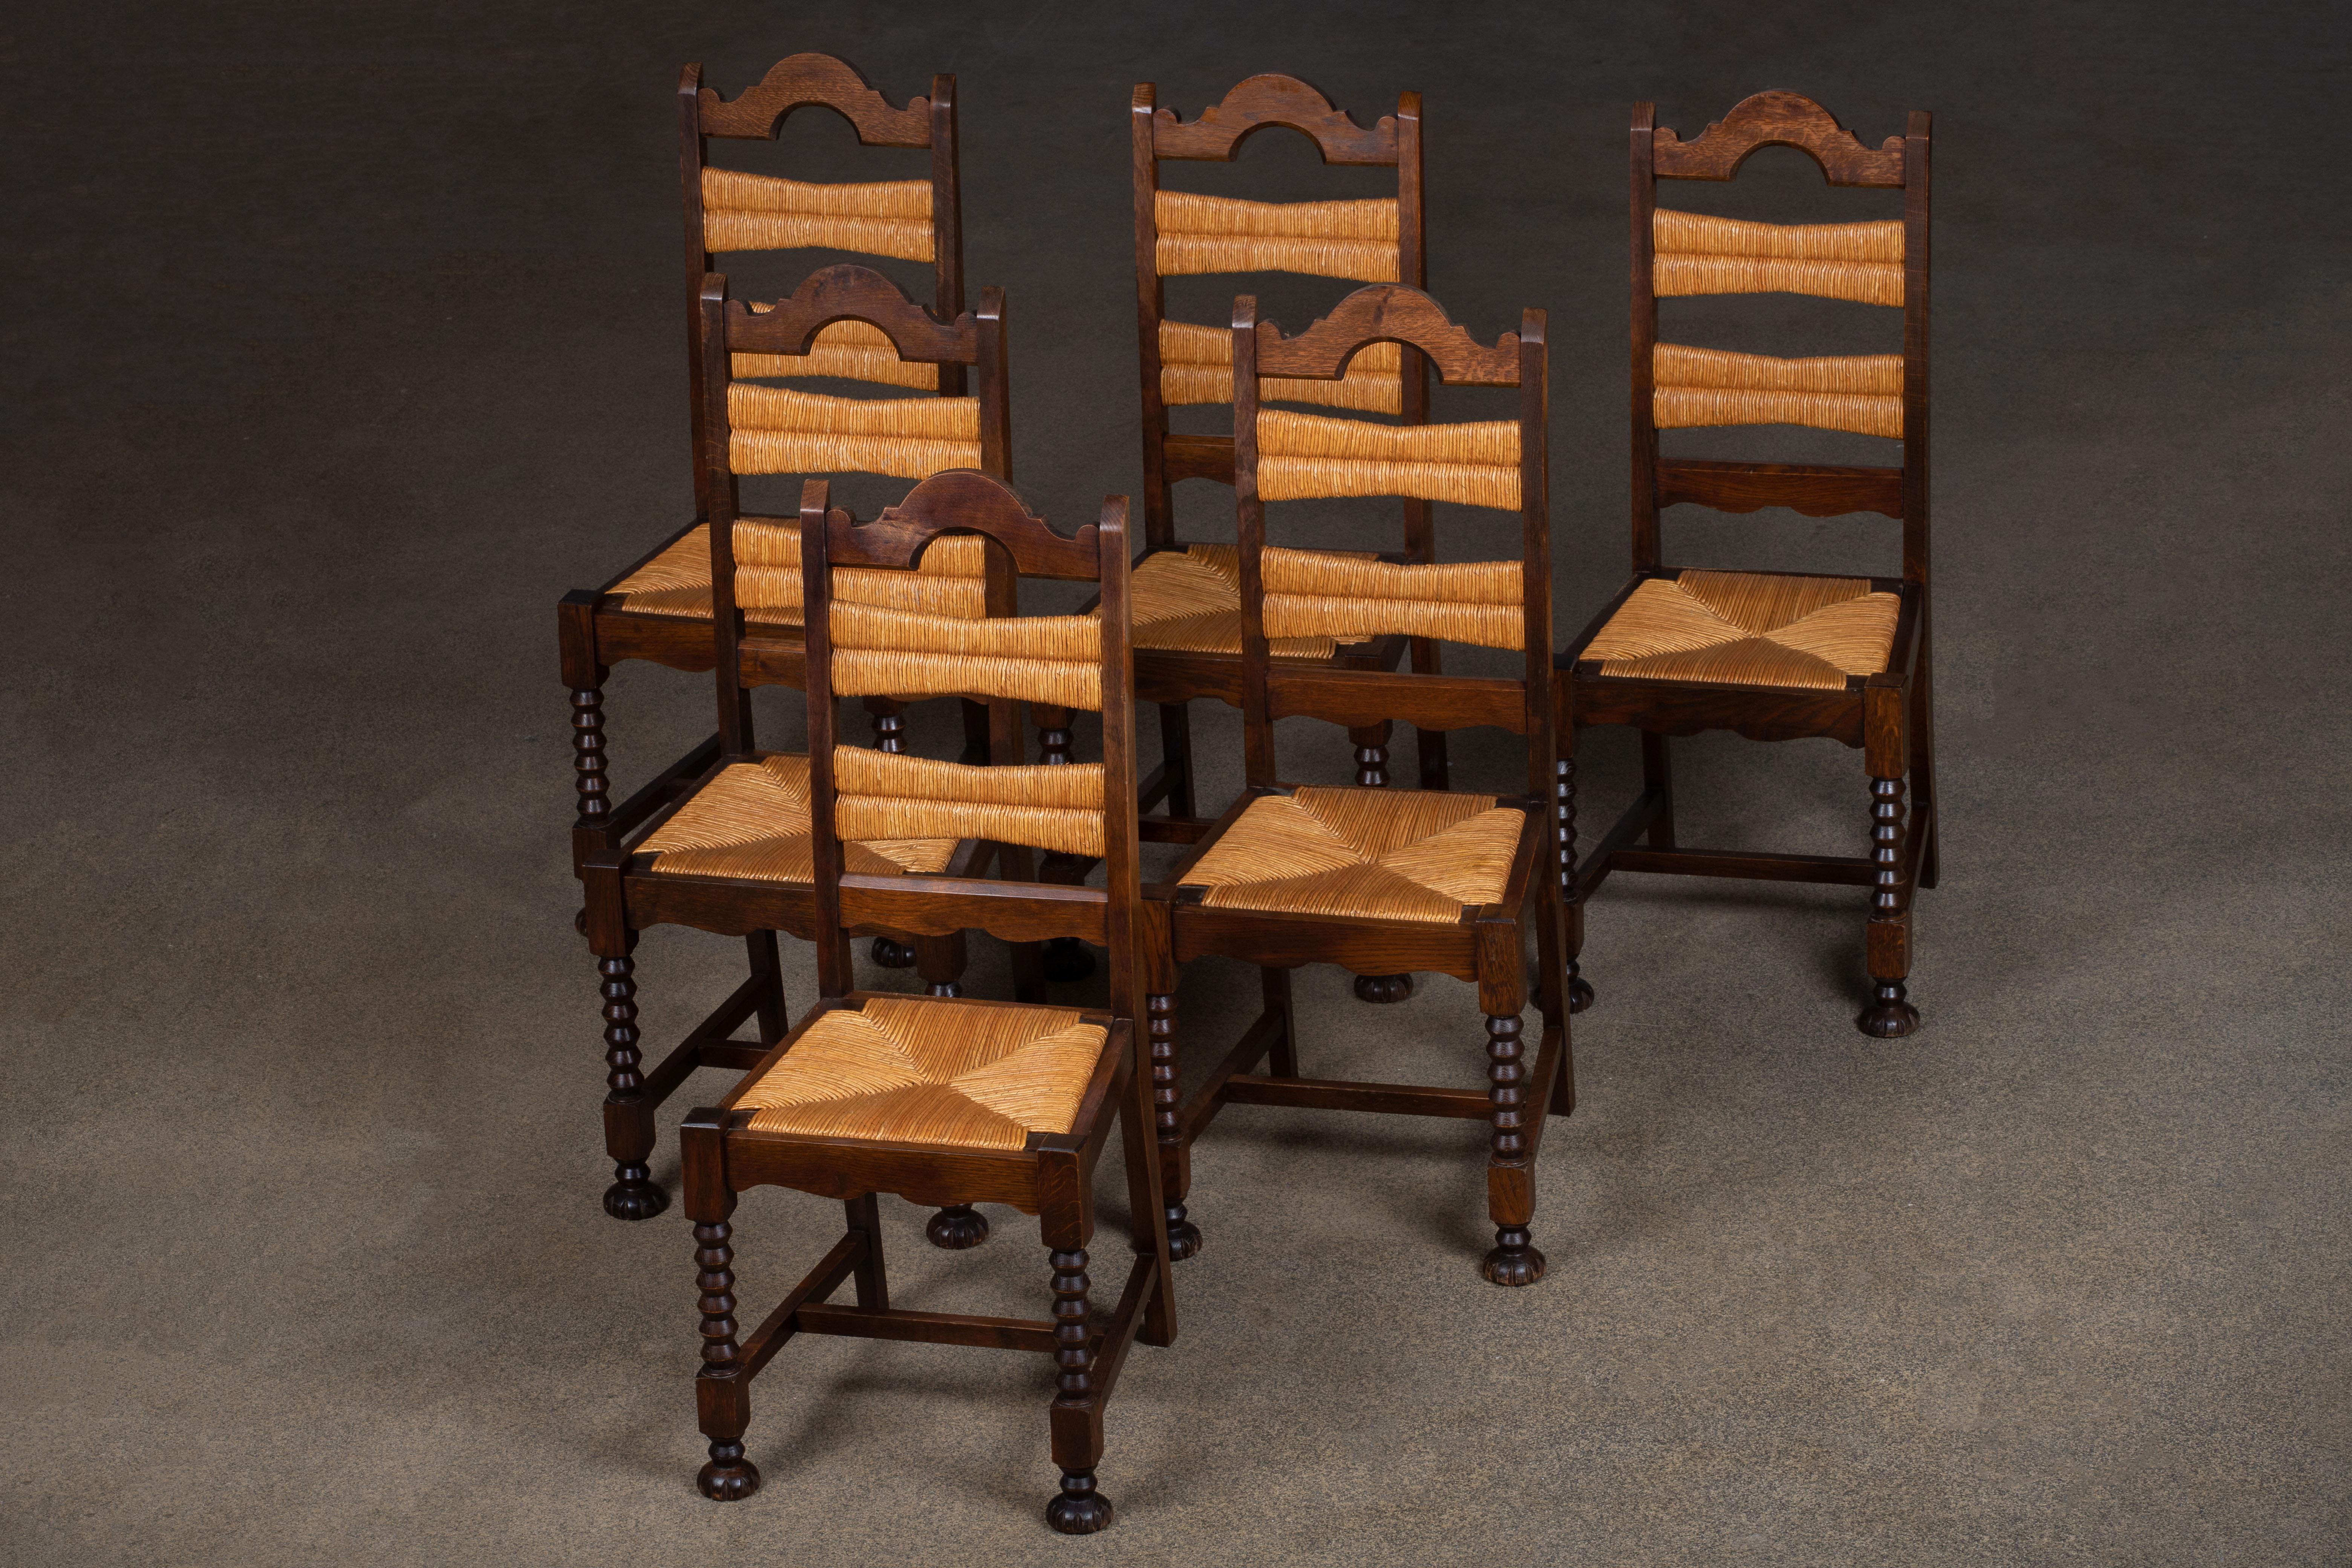 This set of six French Art Deco dining chairs in solid oak was created in the 1940s with a Charles Dudouyt inspiration.

We can clearly see the work of the French school of the 1940s. The detailed and graphic designed backrest panels will meet the